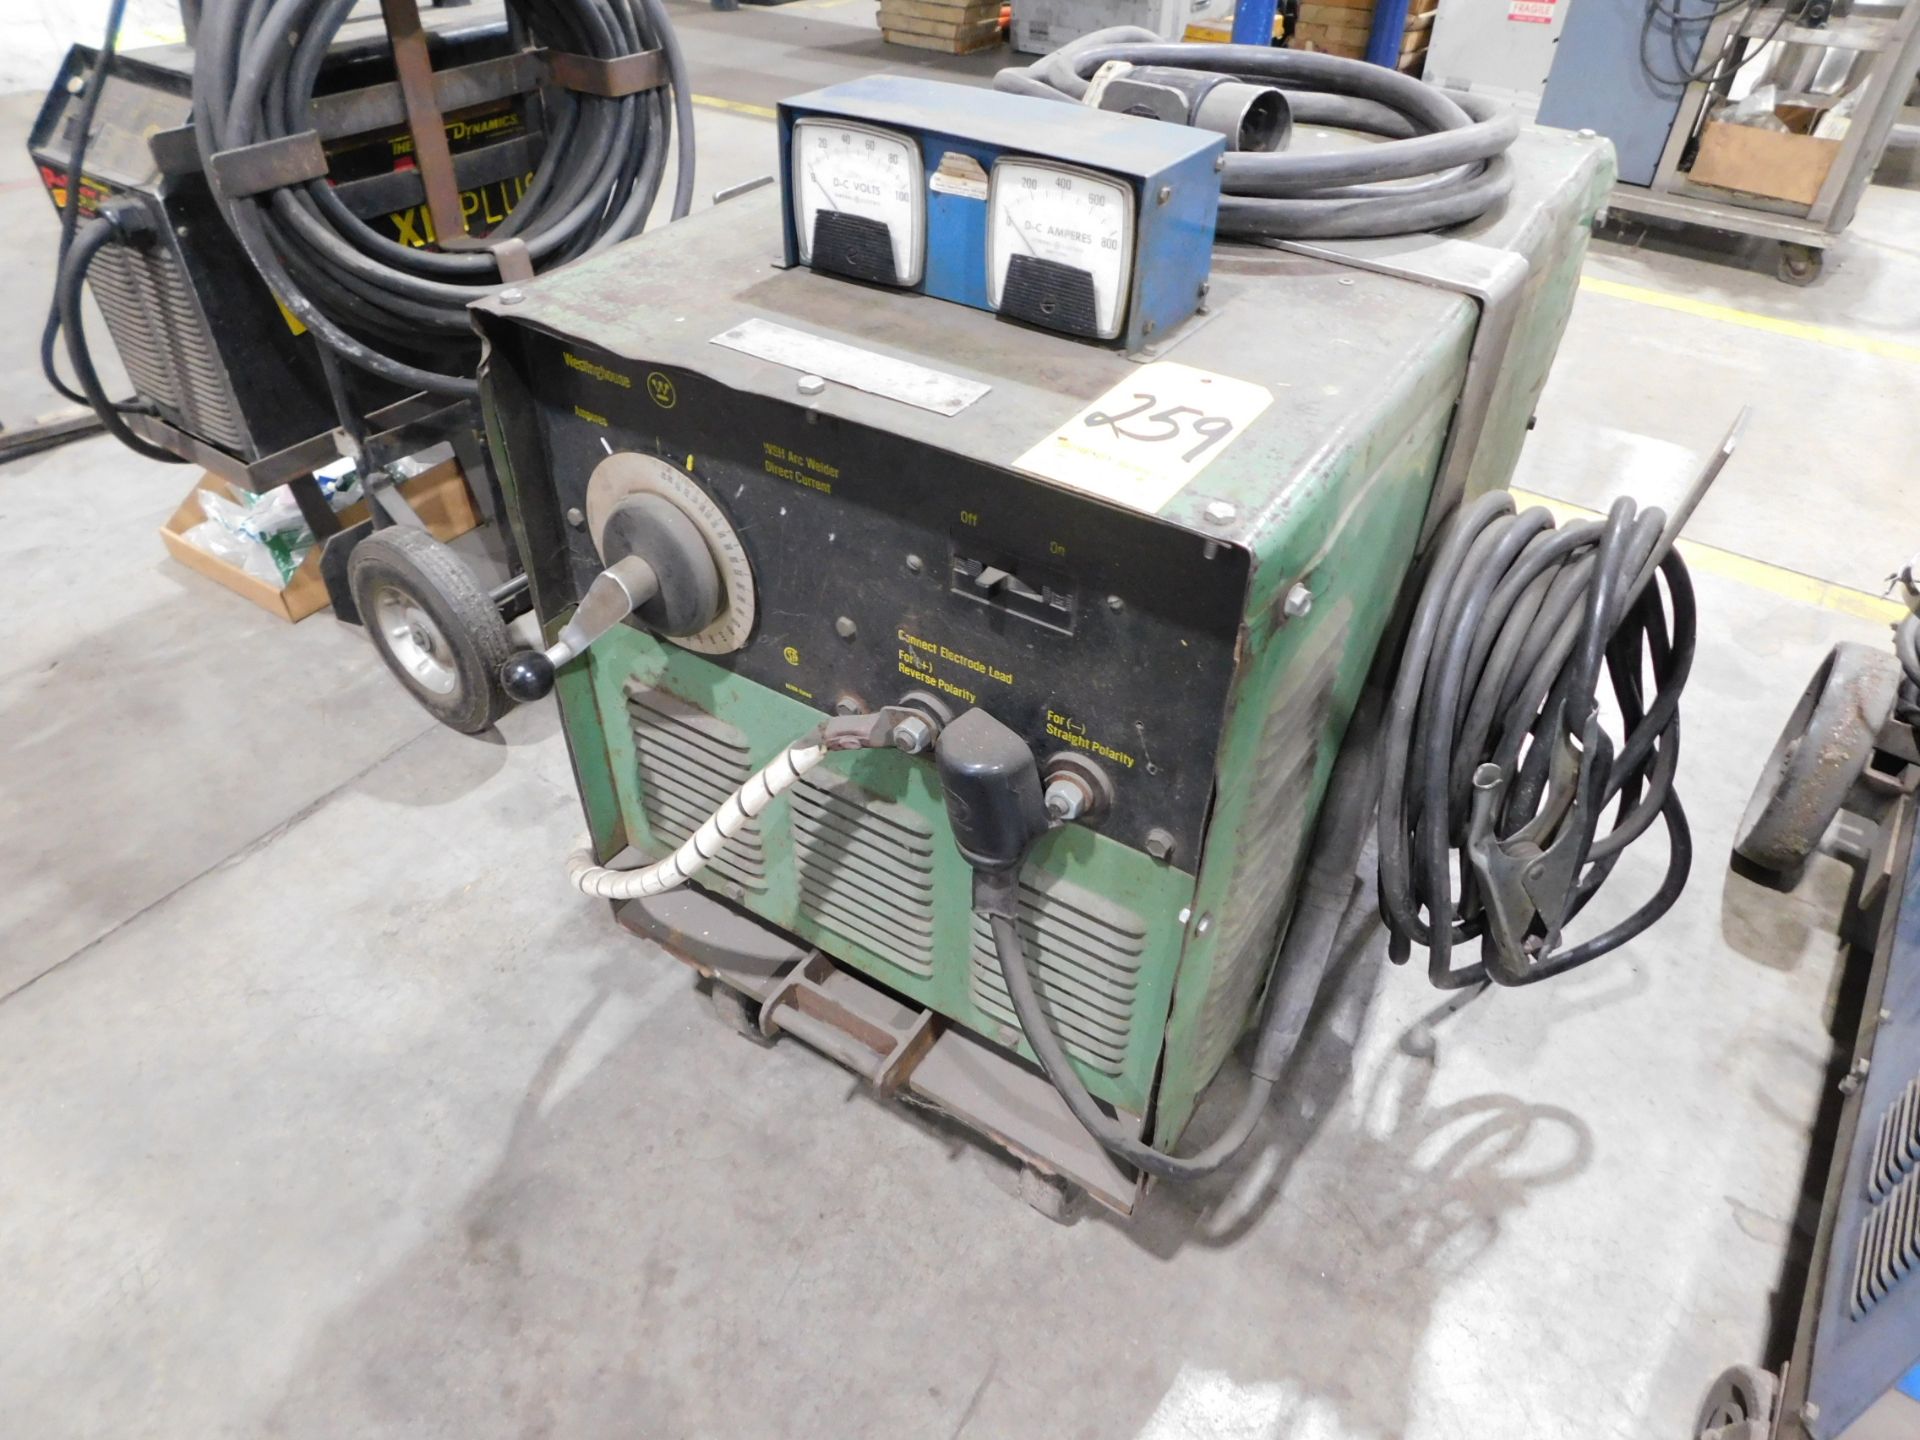 Westinghouse WSH Arc Welder, with Electrode Holder and Ground Cable